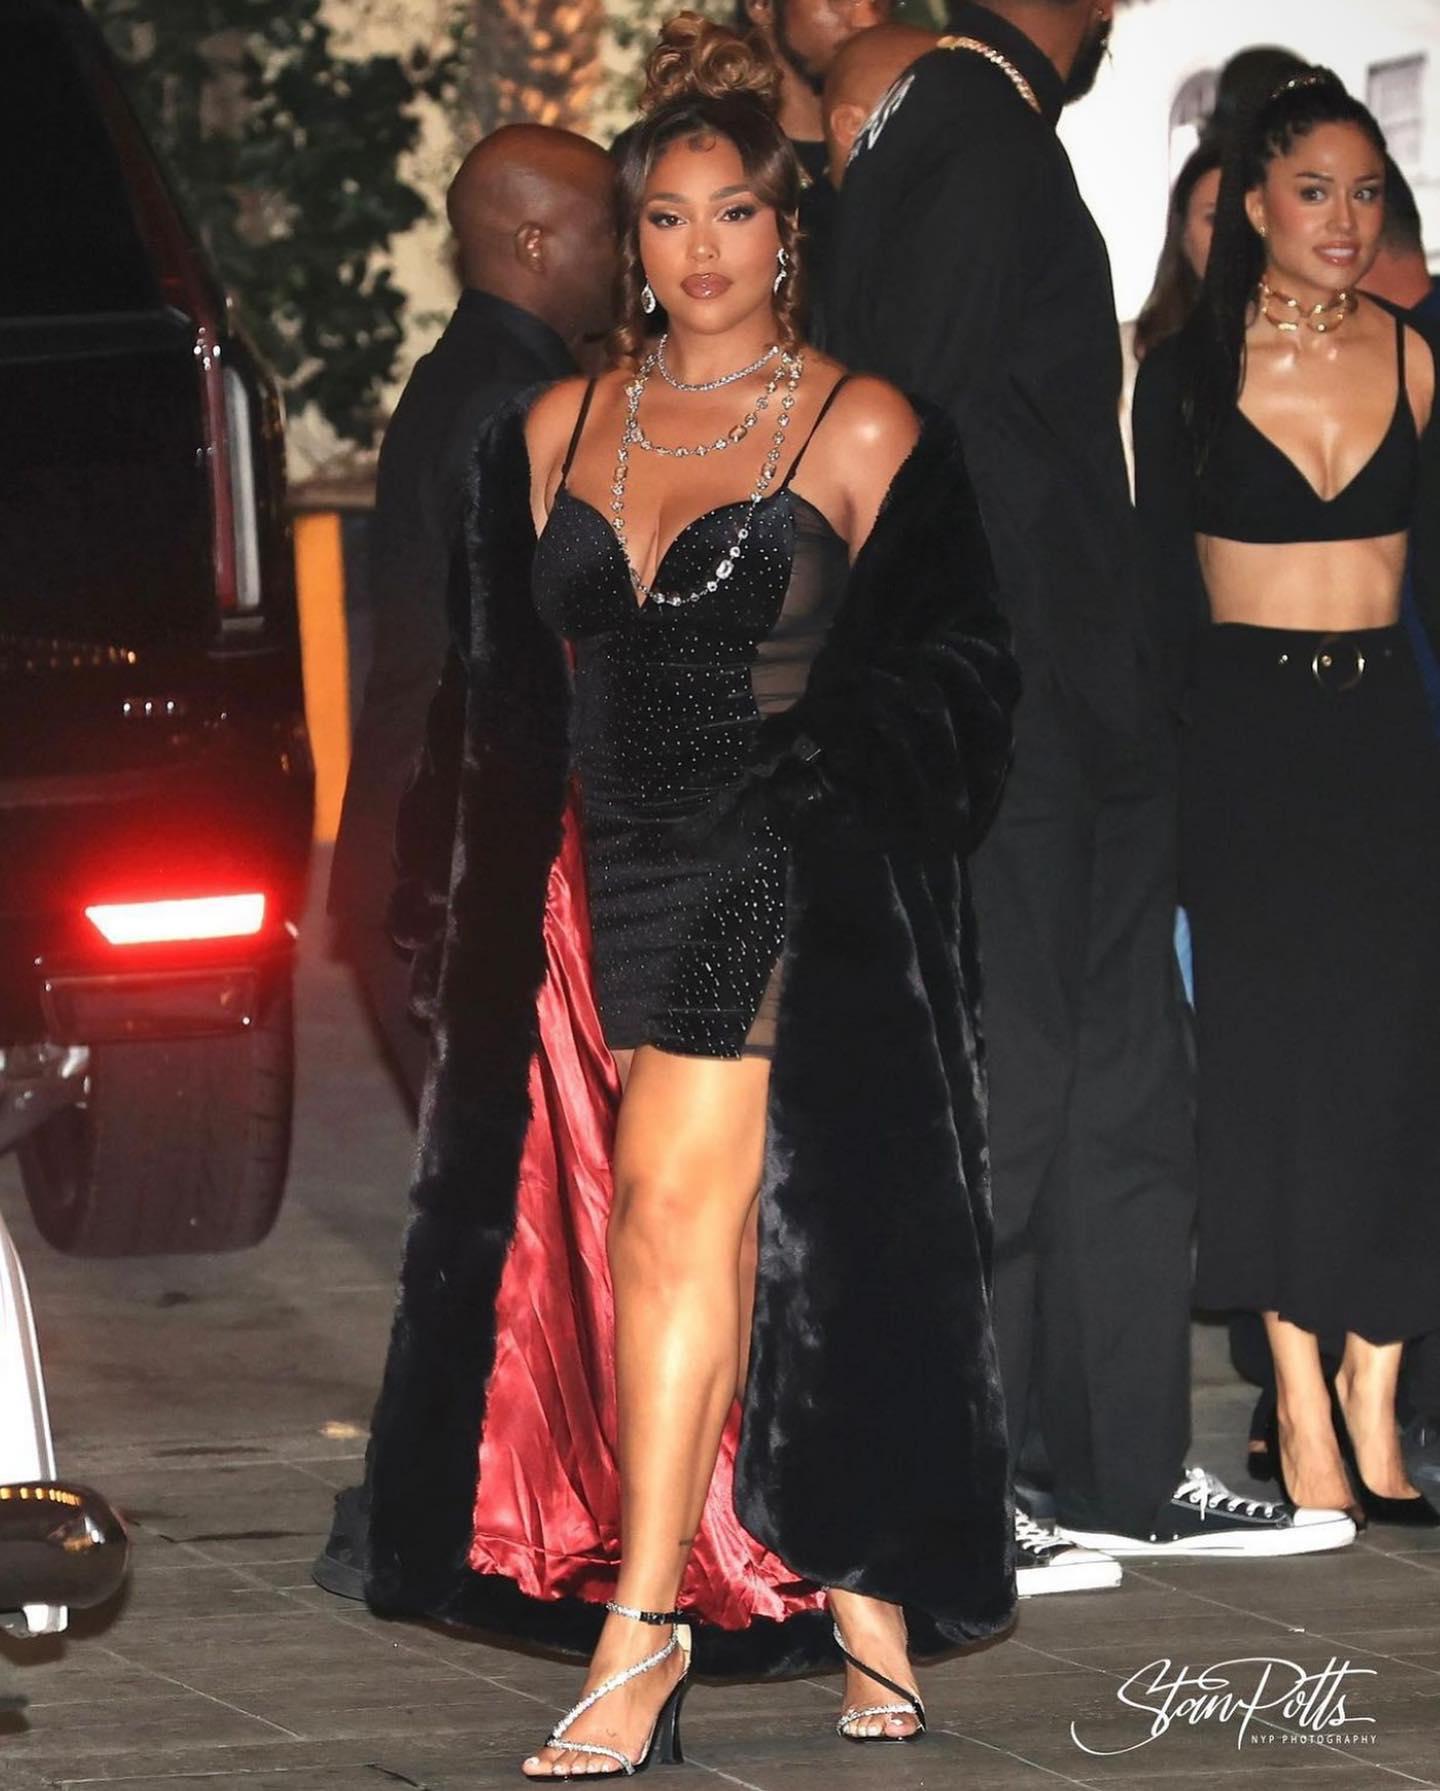 Jordyn Woods at 25th birthday party and SHEIN launch party